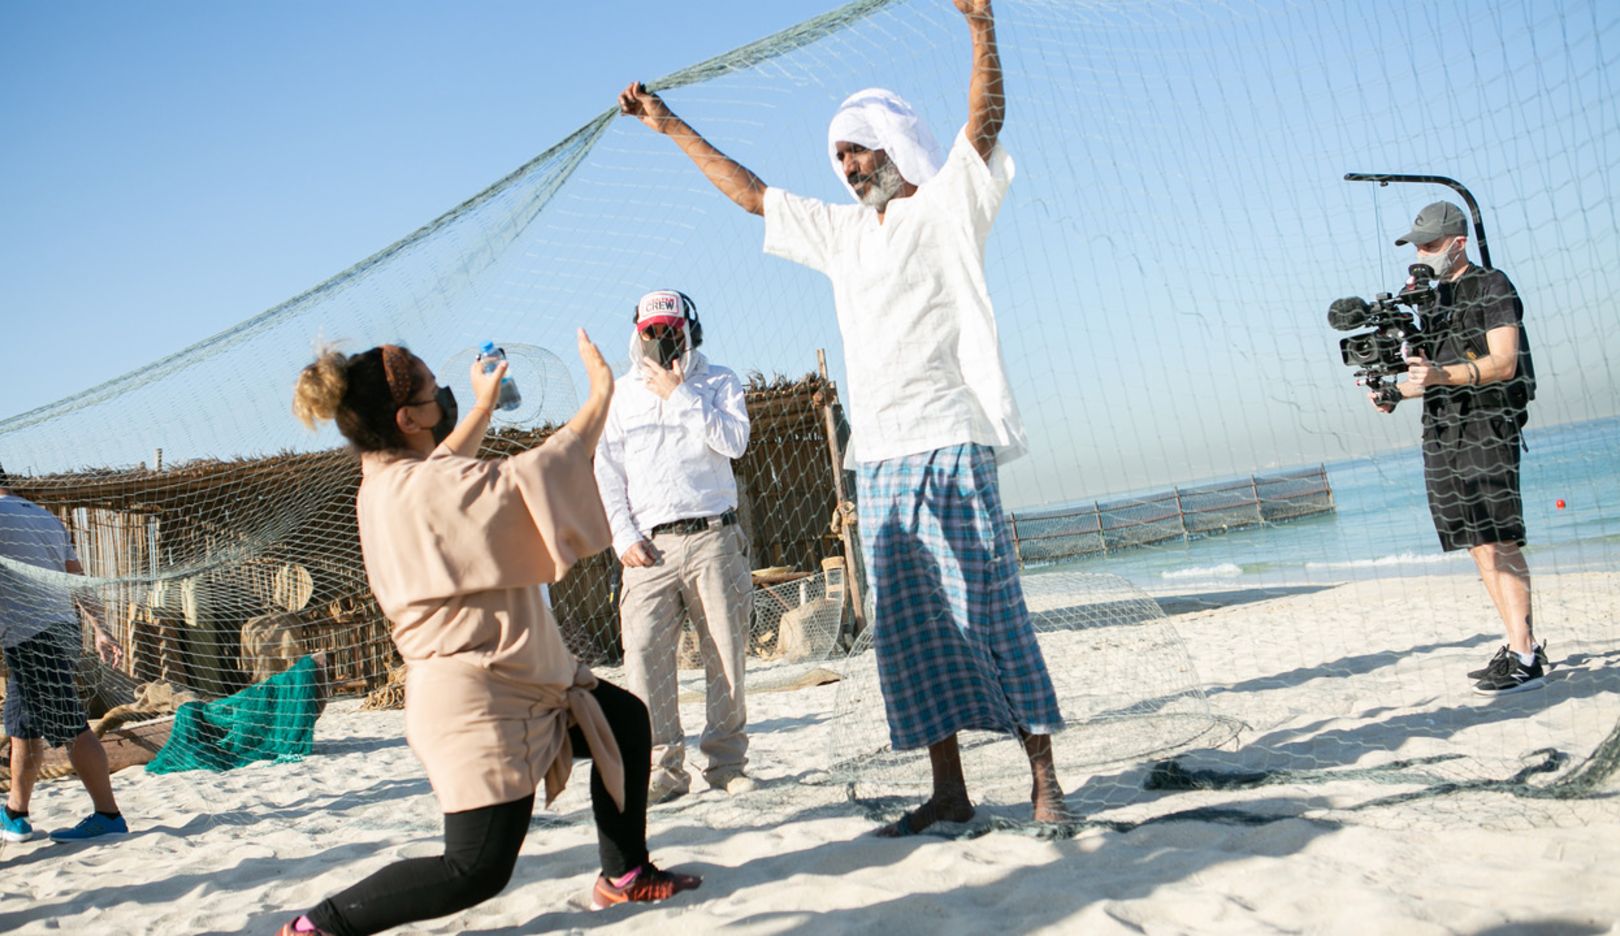 Nayla Al Khaja is known in the industry as the Queen of Narrative  Films. Her repertoire also includes commercials; here, she can be seen filming at Sharjah Beach north of Dubai. Photo: Karen Leonard